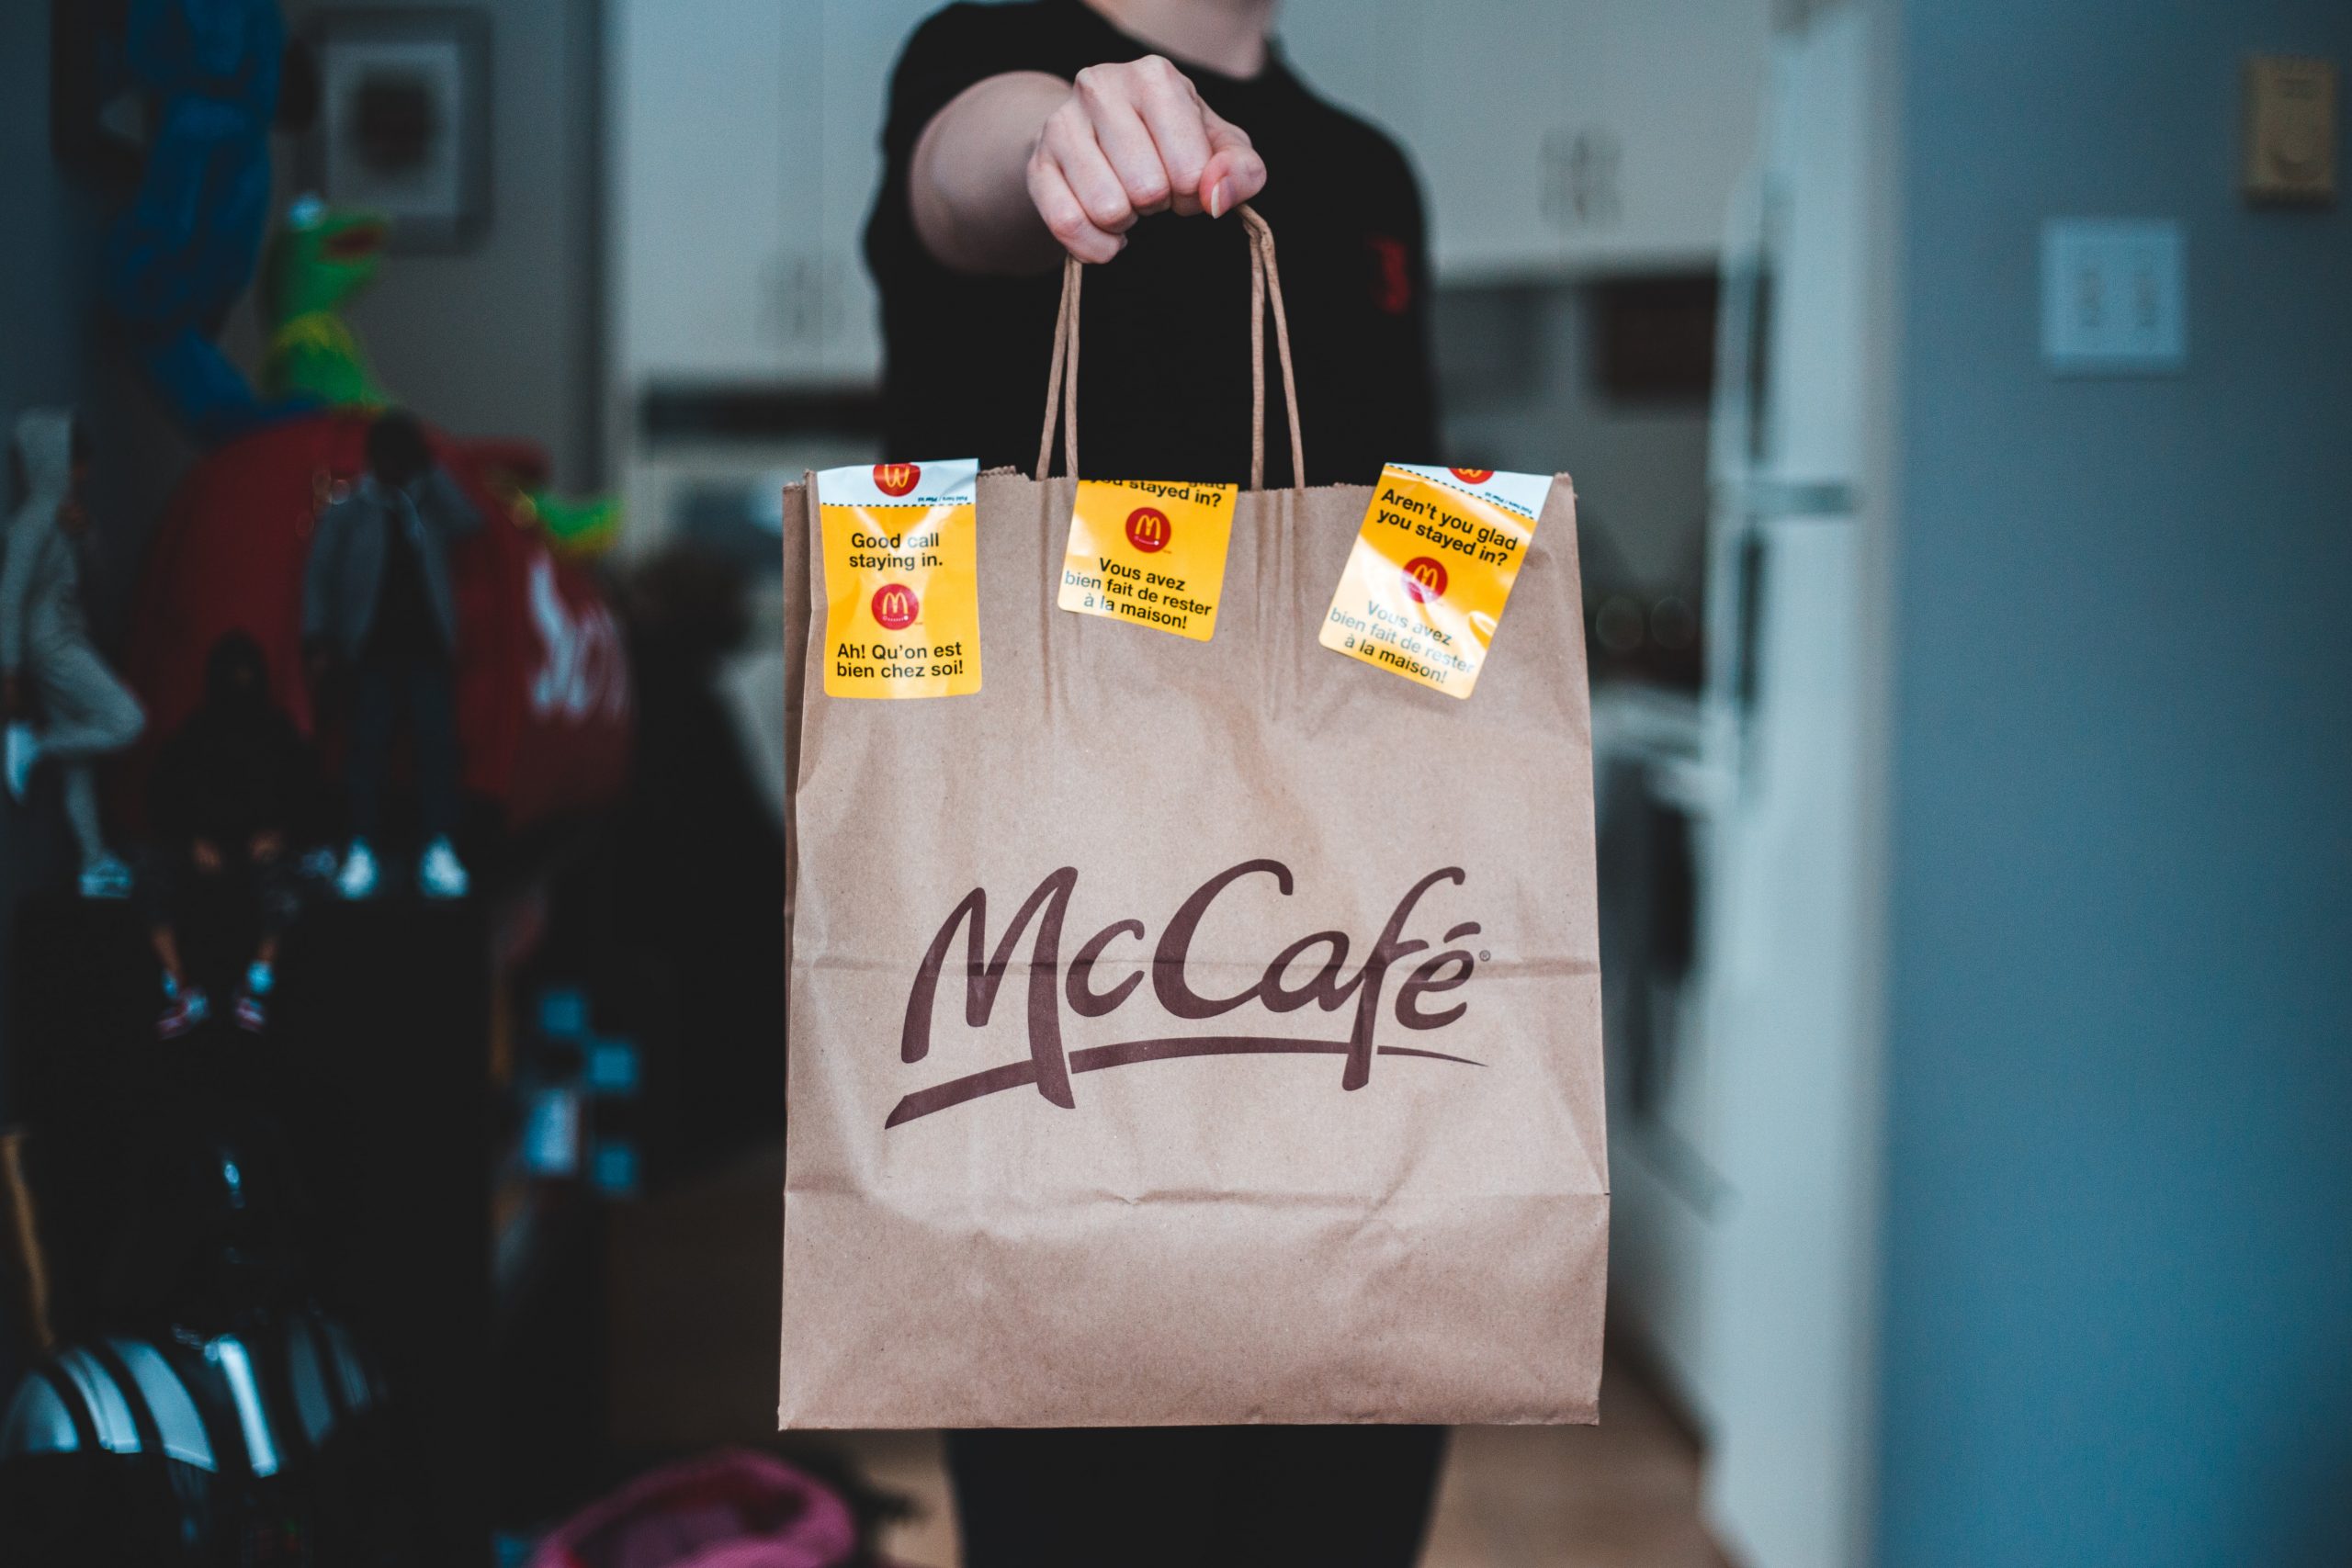 A "McCafe" paper bag is held up to the camera